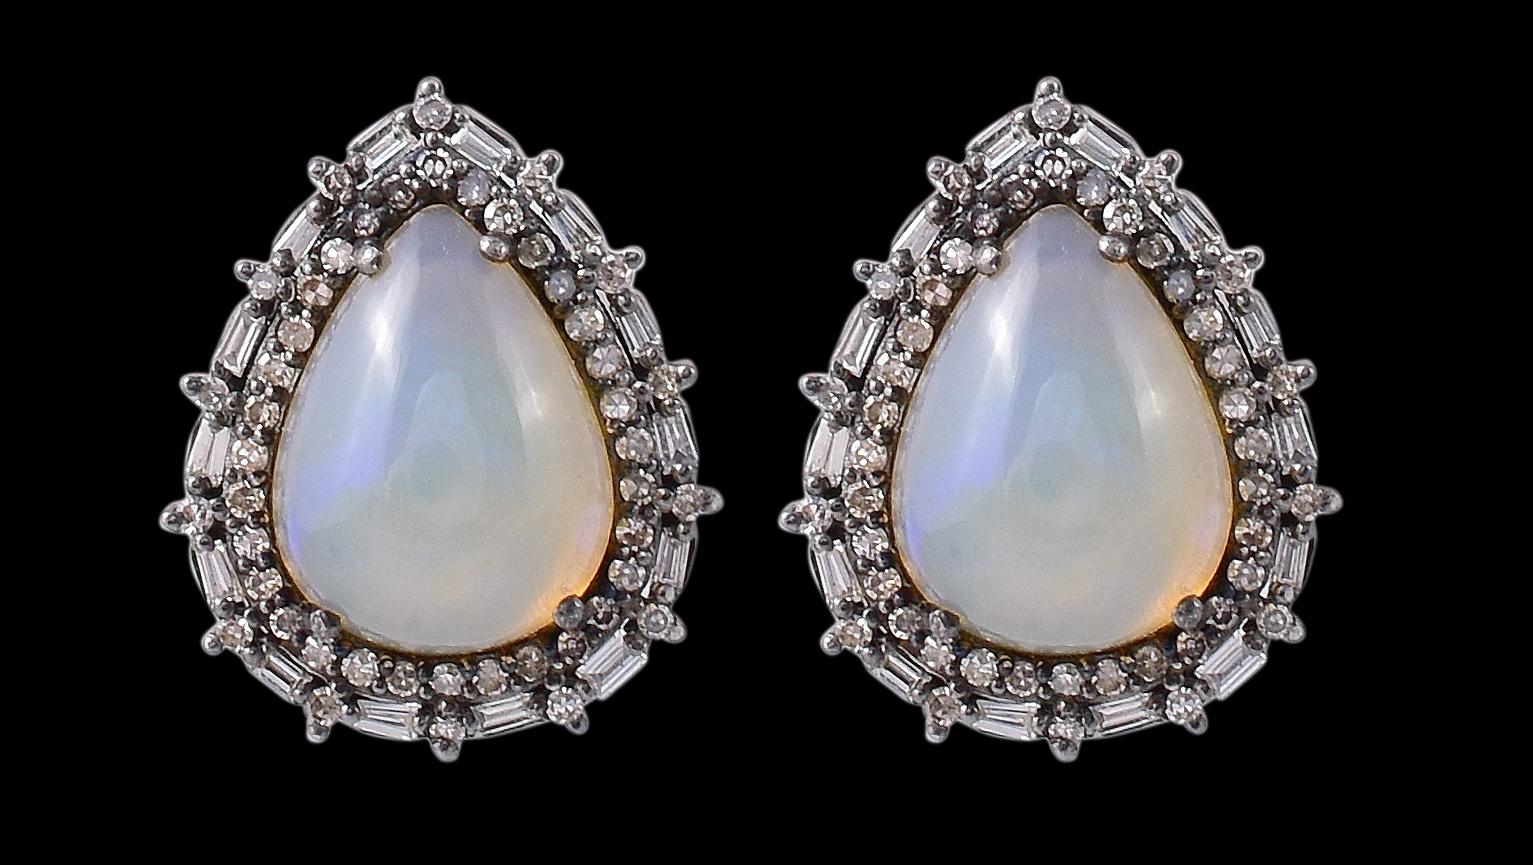 5.33 Carat Opal and Diamond Cluster Stud Earrings in Art-Deco Style

This Victorian concept magnificent fire rainbow opal and diamond stud earring is majestic. The solitaire beautiful pear cabochon opal is gracefully surrounded with a pave set